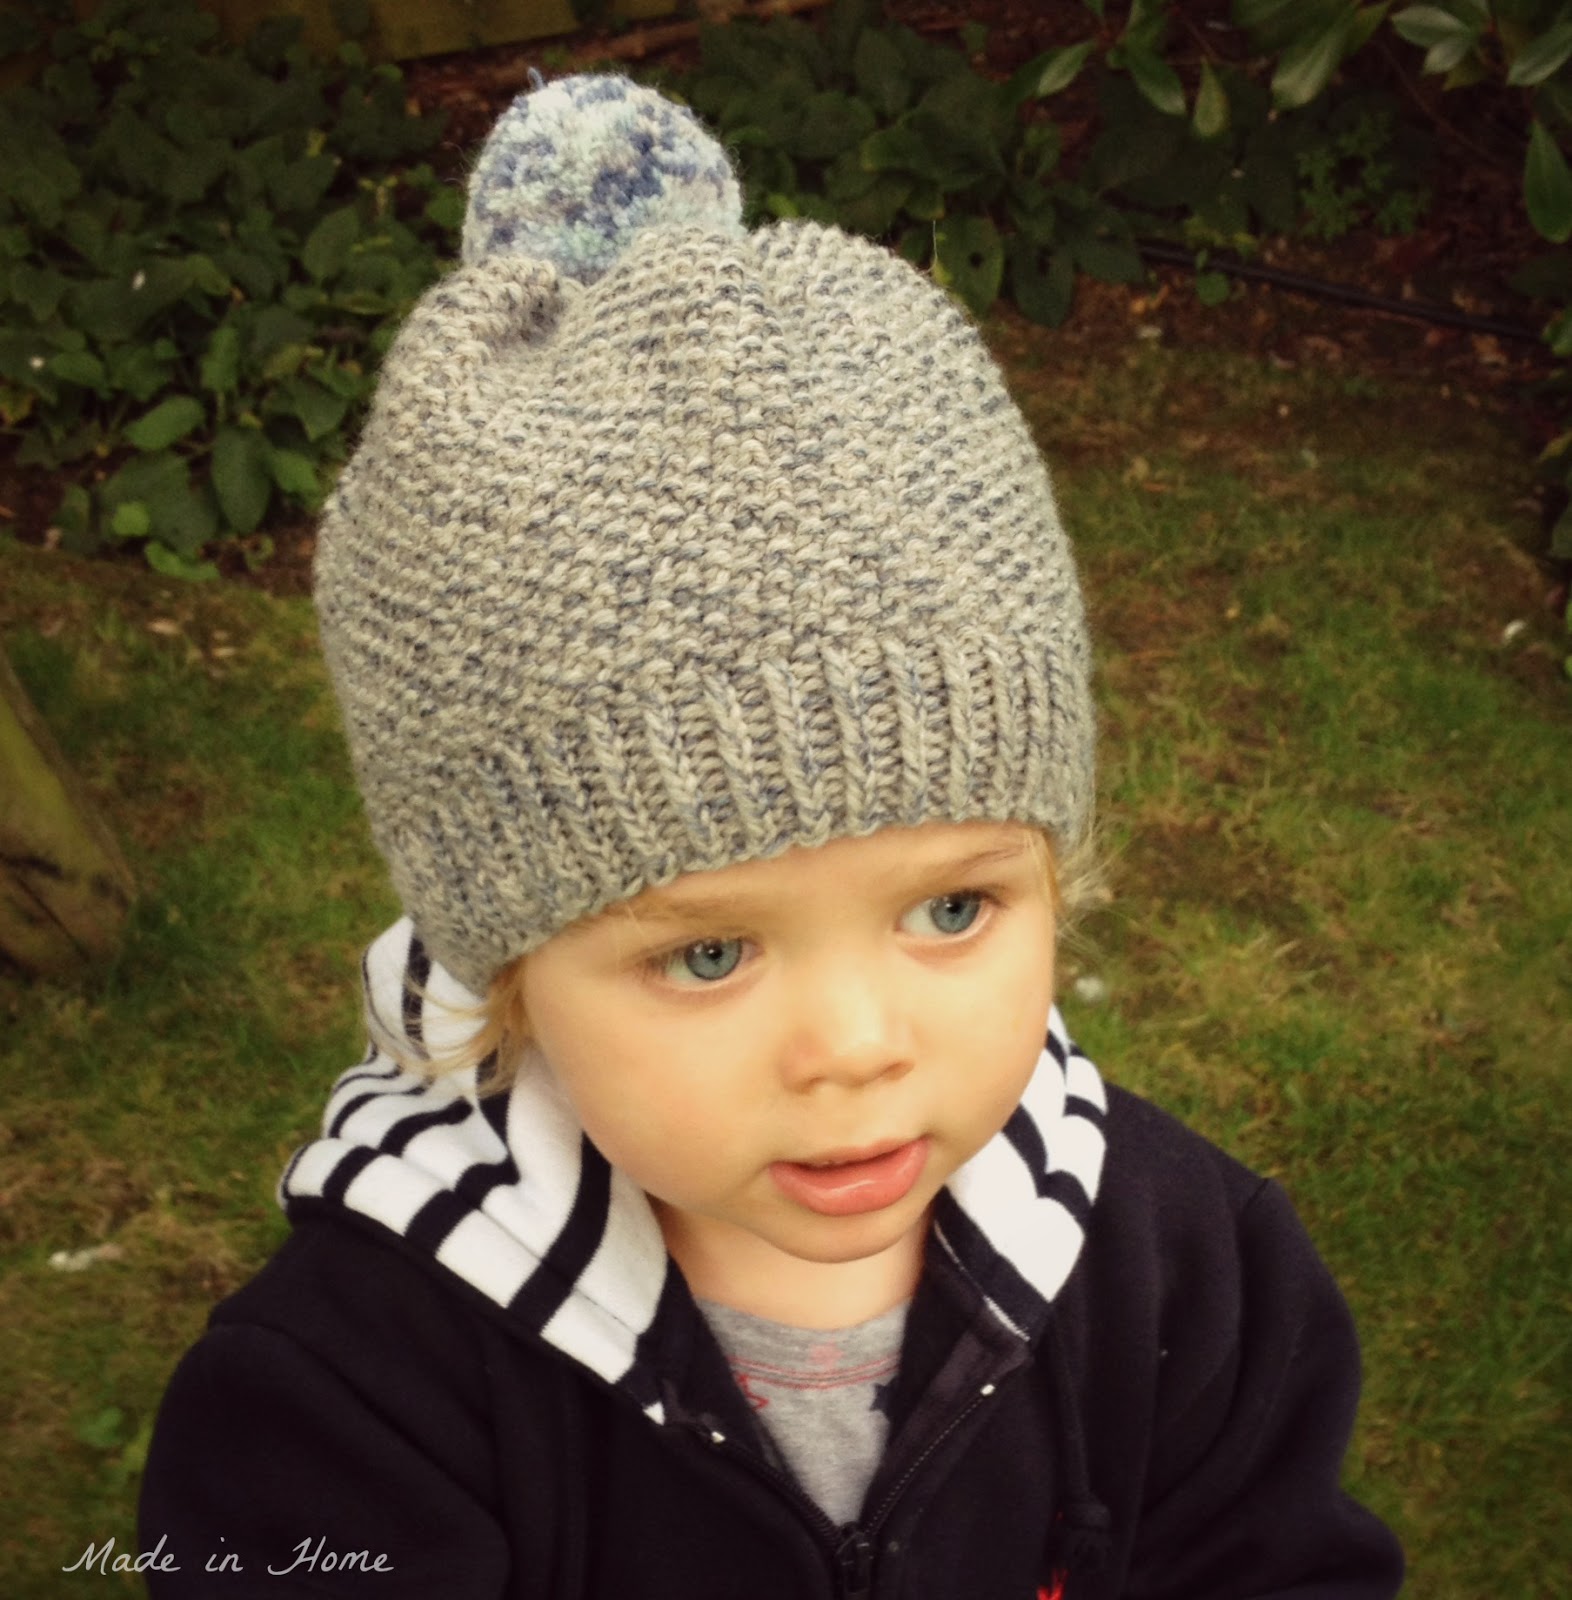 Made in Home: Toddler Pompom Beanie Hat | A free pattern ...